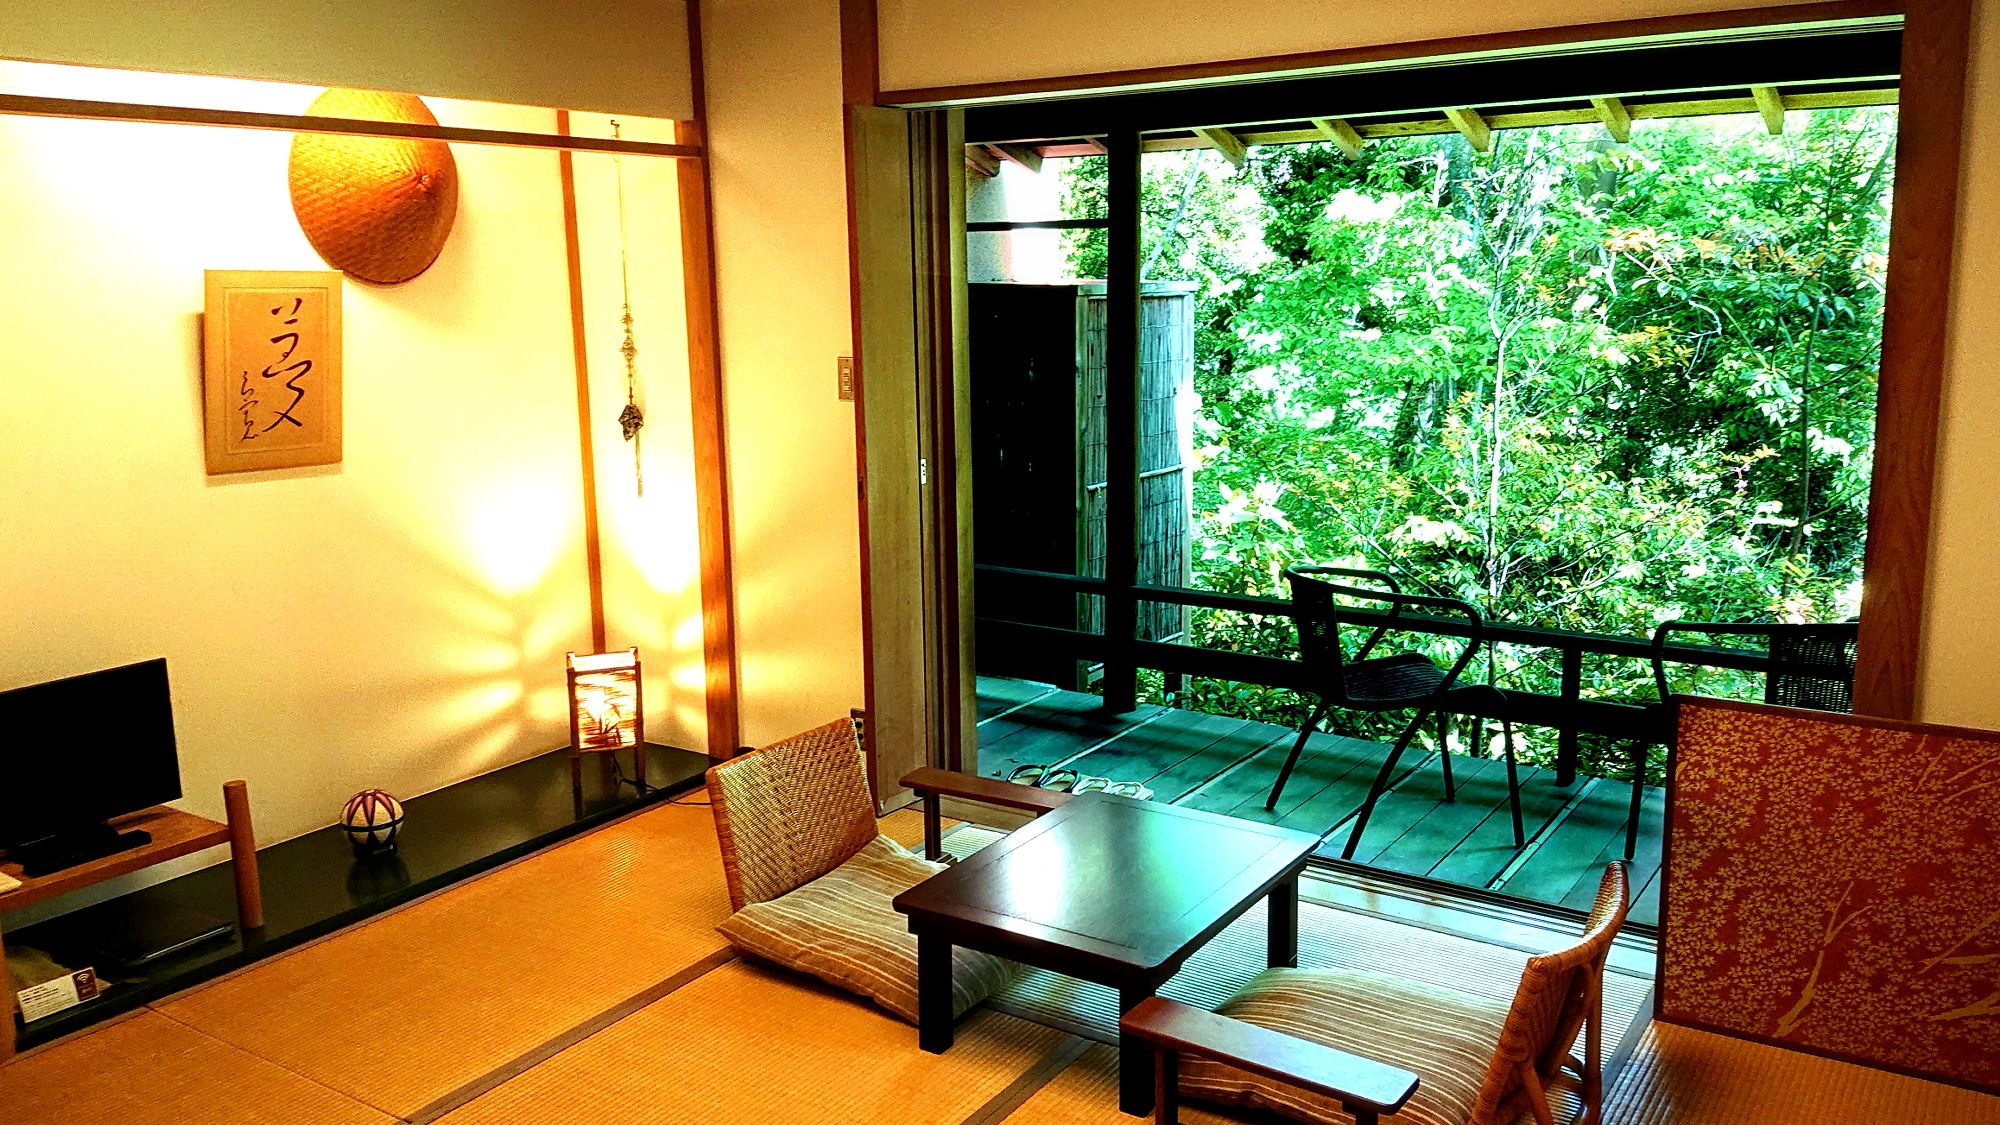 ◆ Small Japanese-style room in the wind building